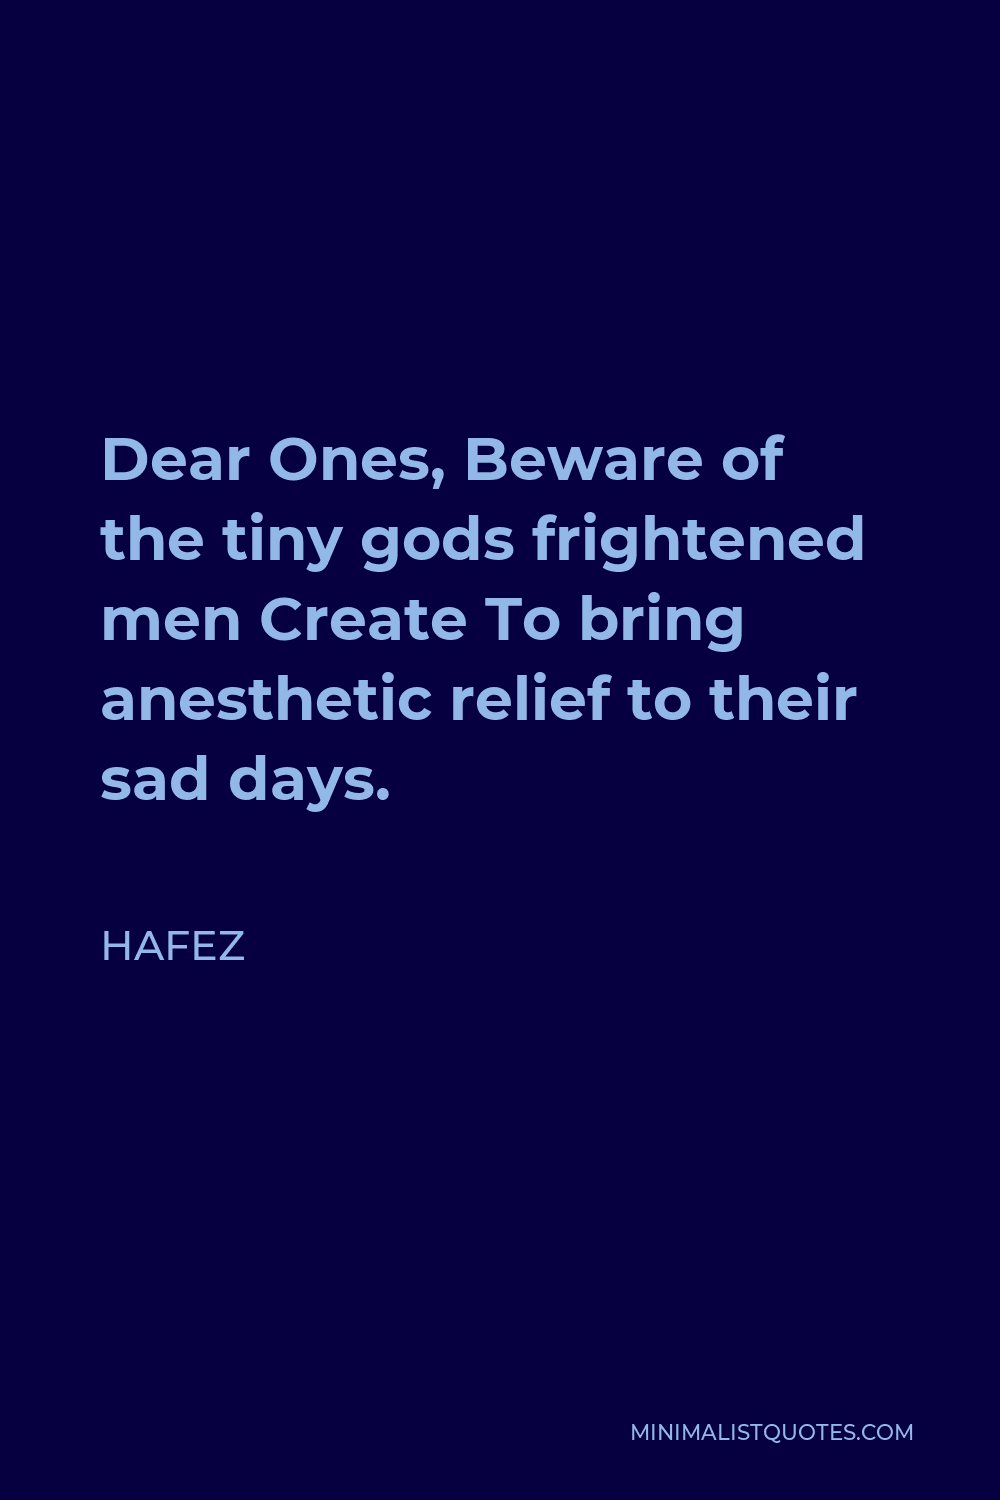 Hafez Quote - Dear Ones, Beware of the tiny gods frightened men Create To bring anesthetic relief to their sad days.